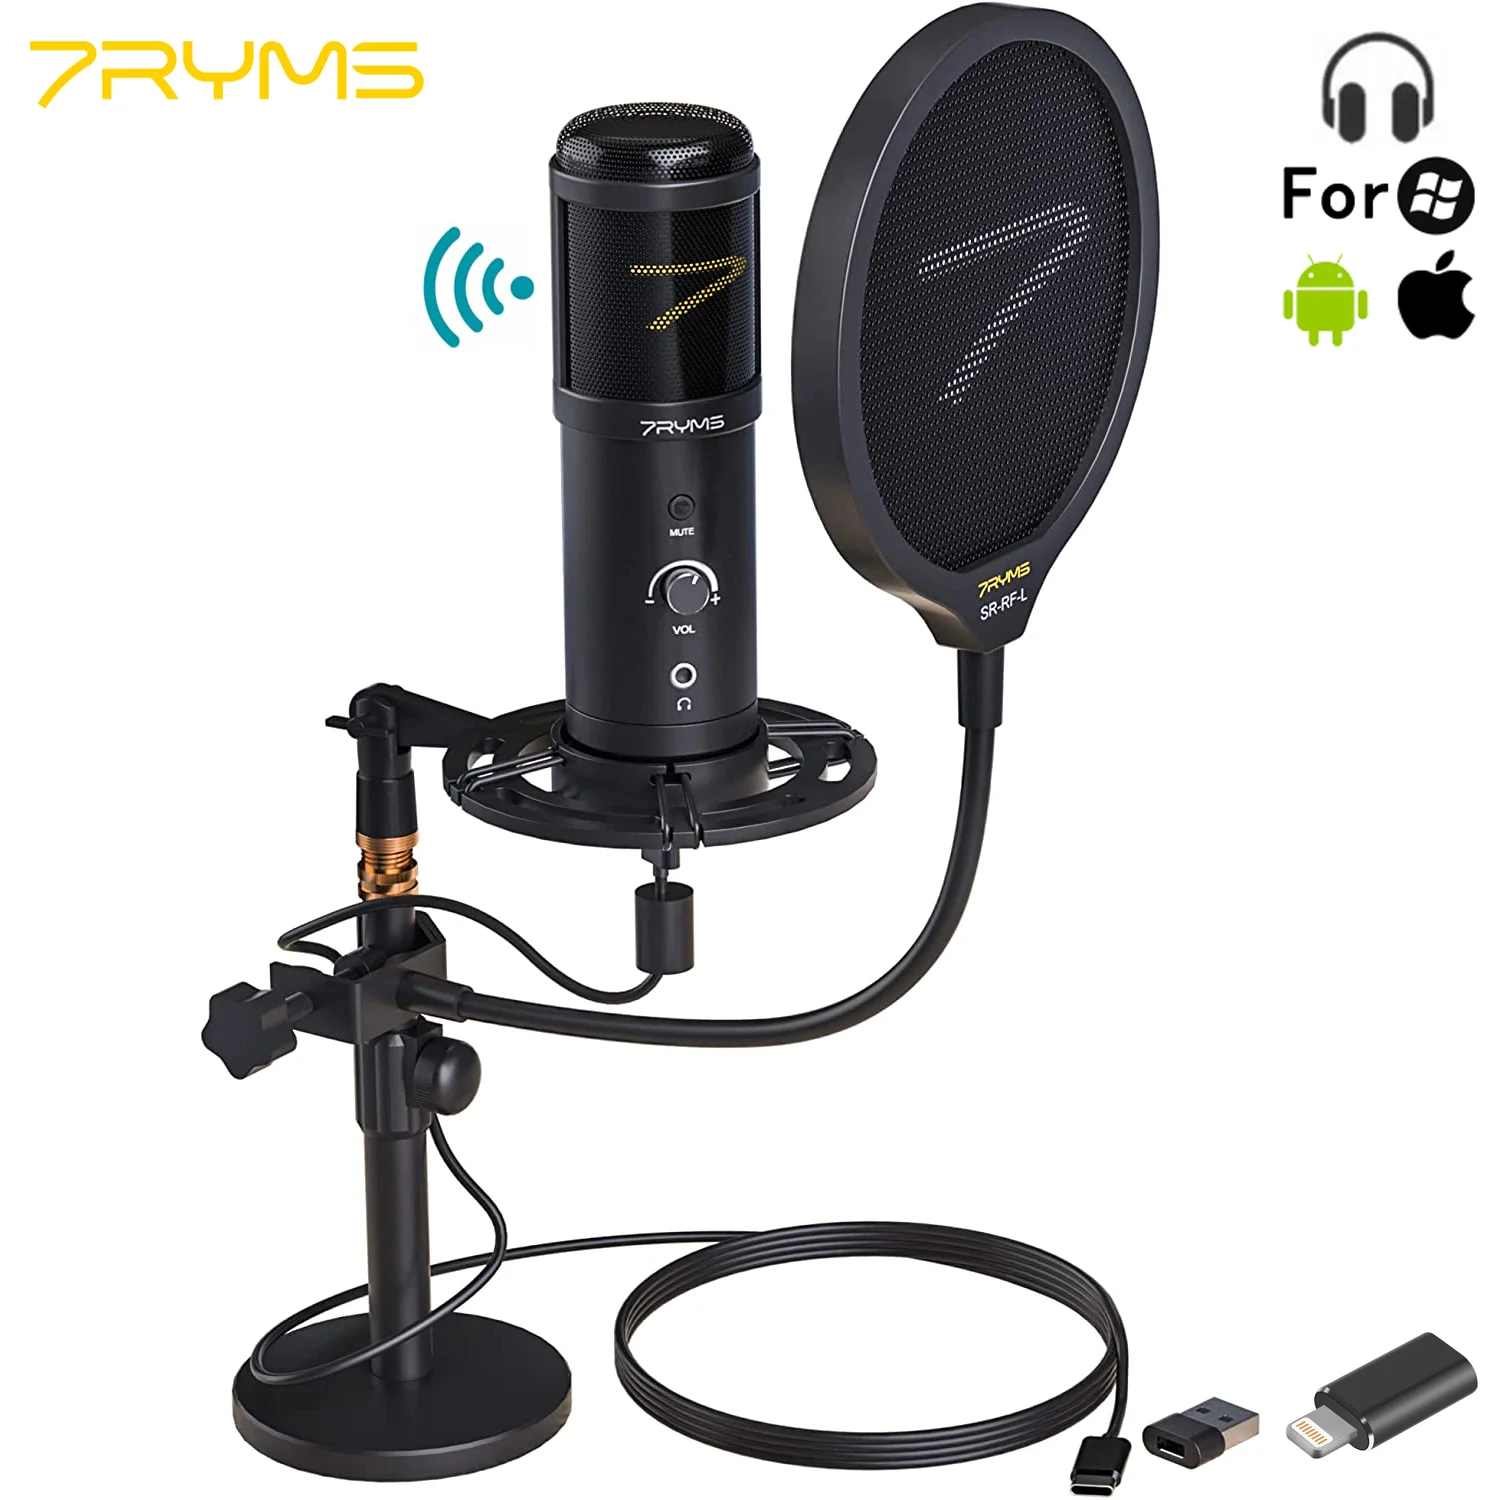 Enlarge 7RYMS Condenser USB Microphone SR-AU01-K2 PC Microphone Kit with Shock Mount and Real-time Monitor for Podcast Live Streaming